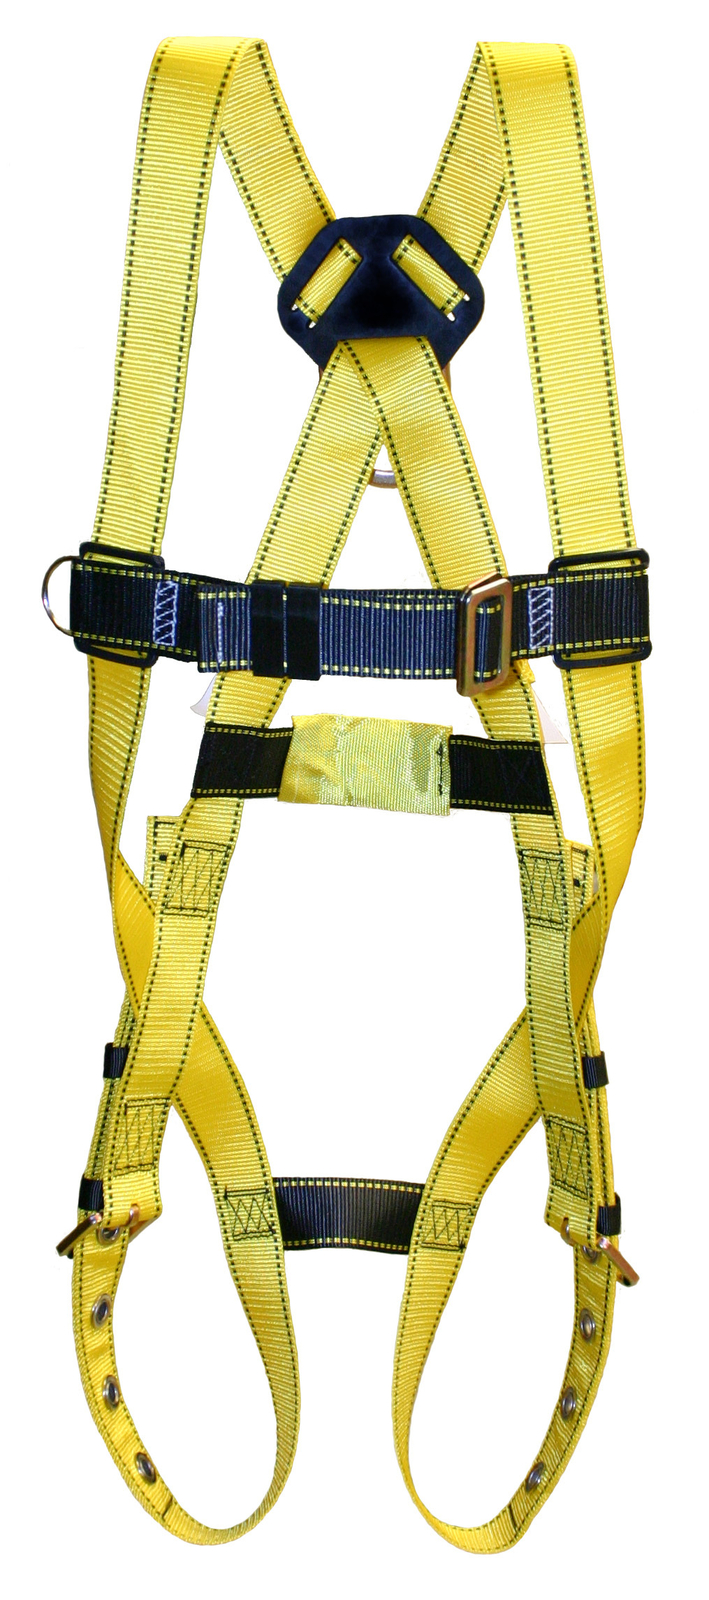 MLR VALUE 900 Compliance Safety Harness w/Tongue Buckles) (CSA)